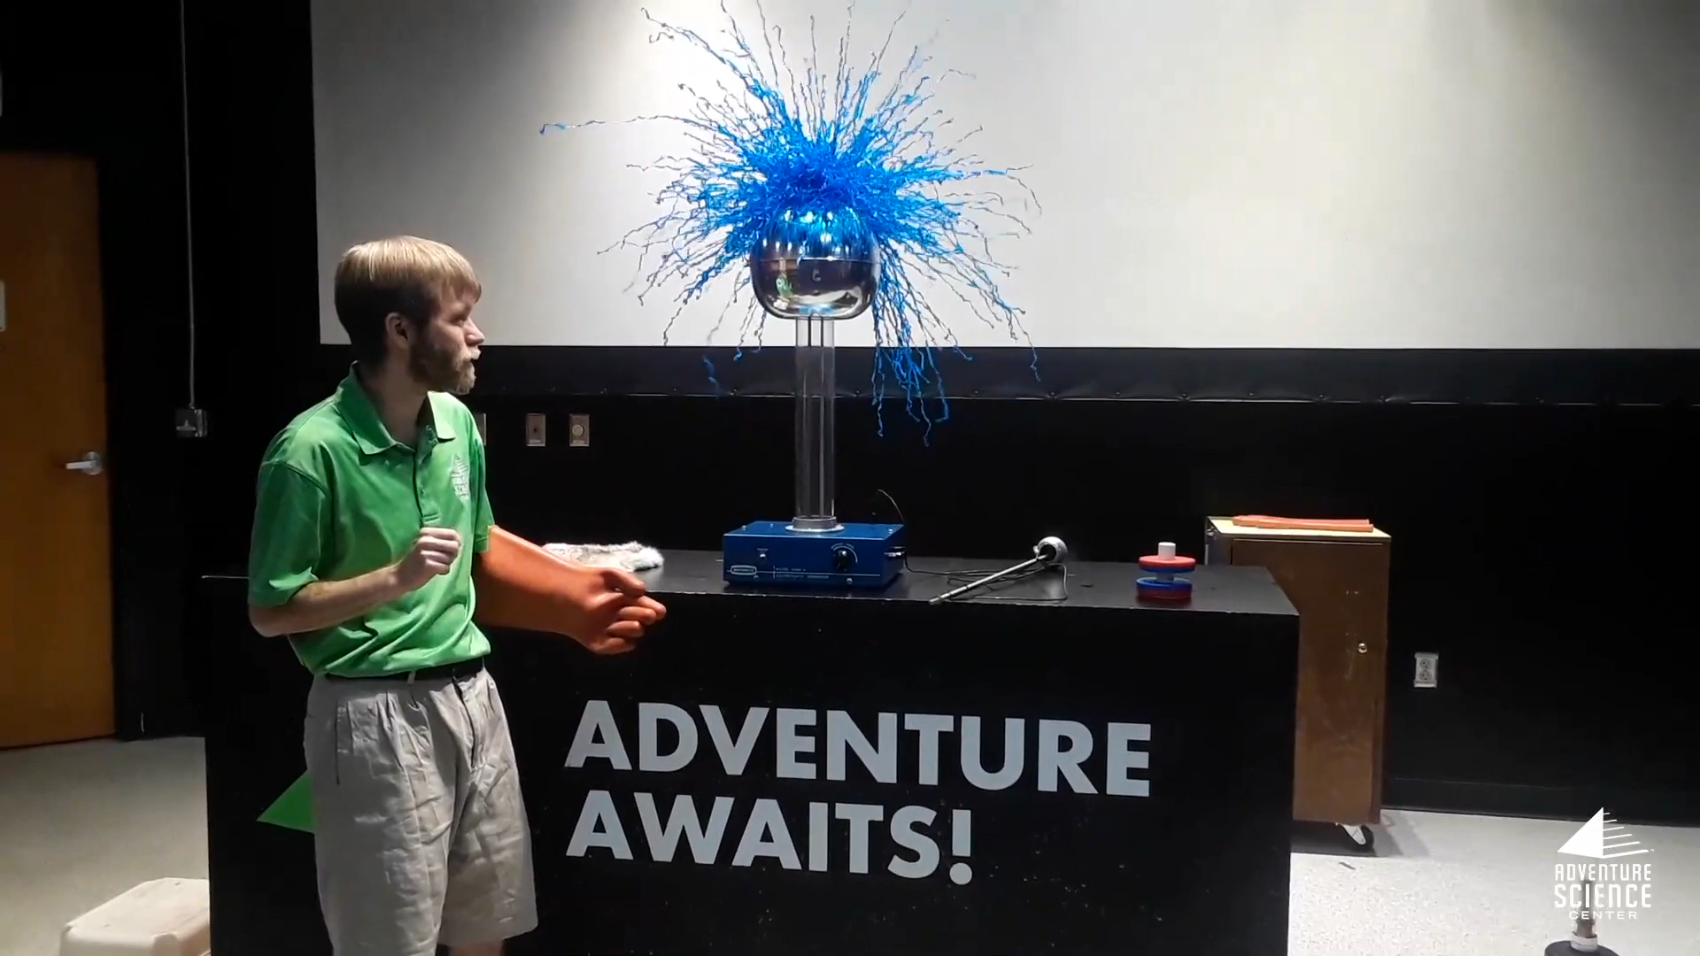 watch this fun video having fun with magnets and electricity